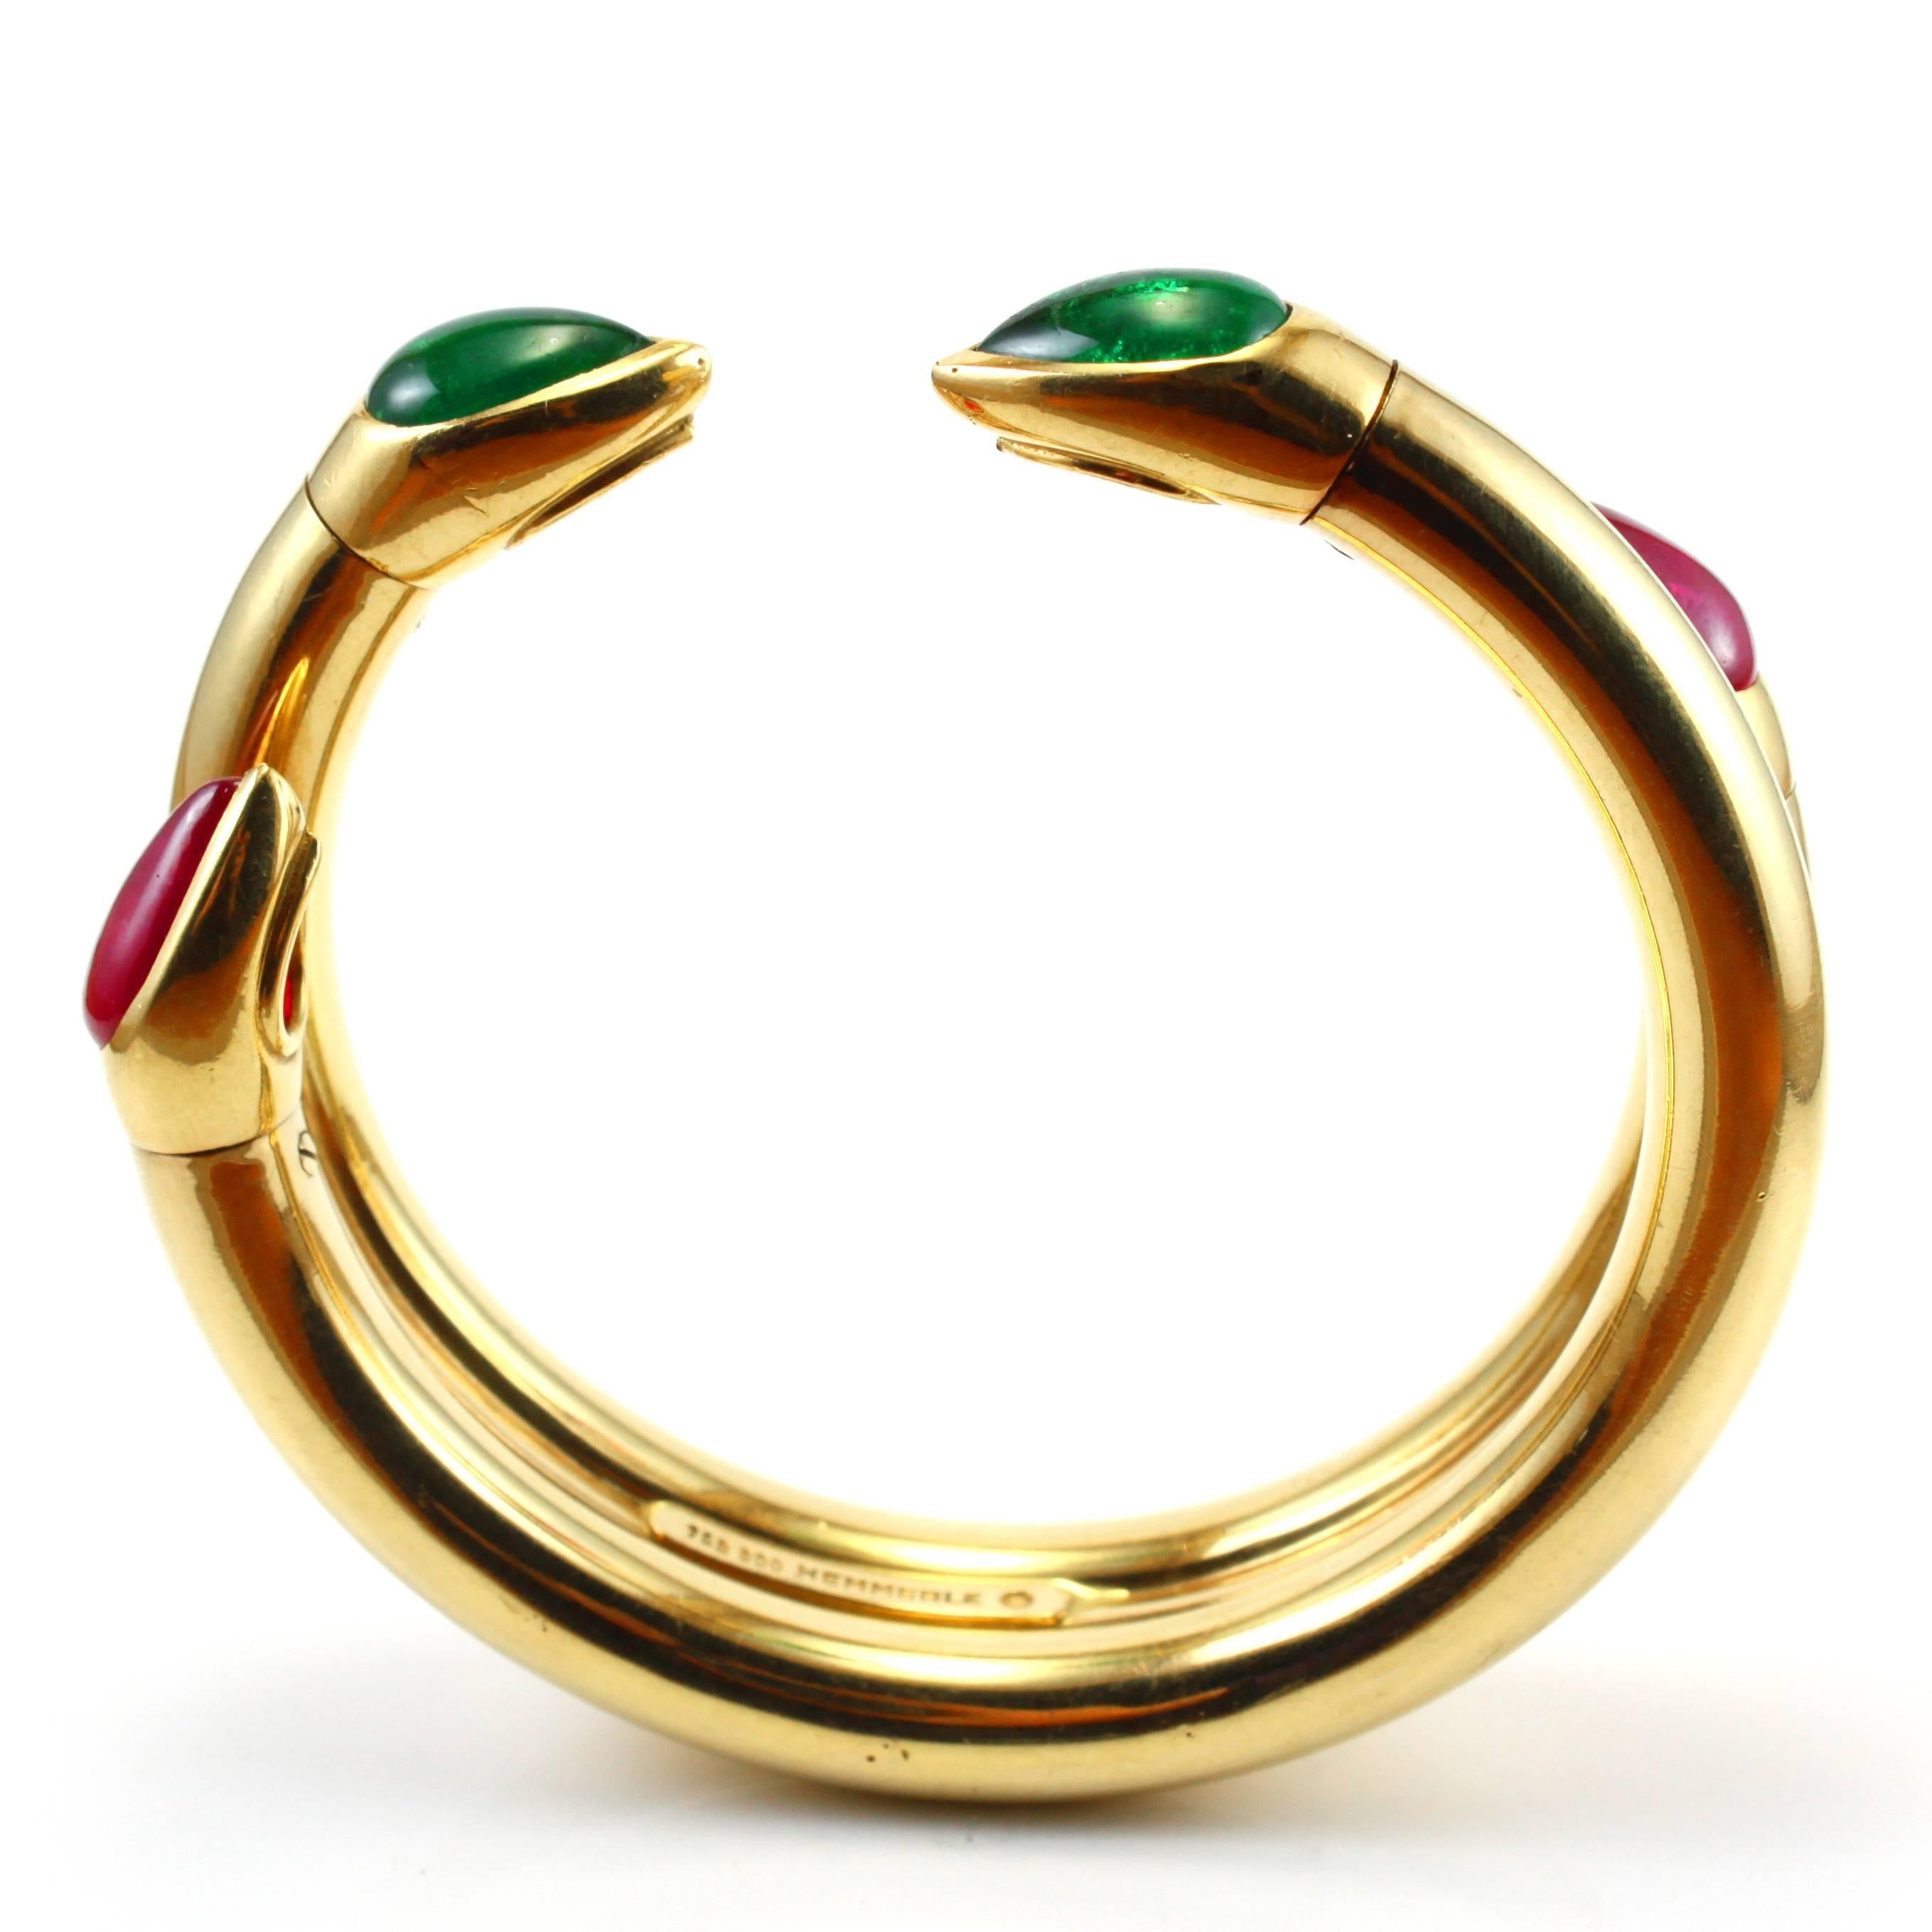 An important ruby and emerald cuff bangle in 18k yellow gold, by Hemmerle, late 20th Century. The two fine red ruby drops are natural (not-heated) and weigh circa 8 carats together and the two intense green emerald drops weigh circa 5 carats